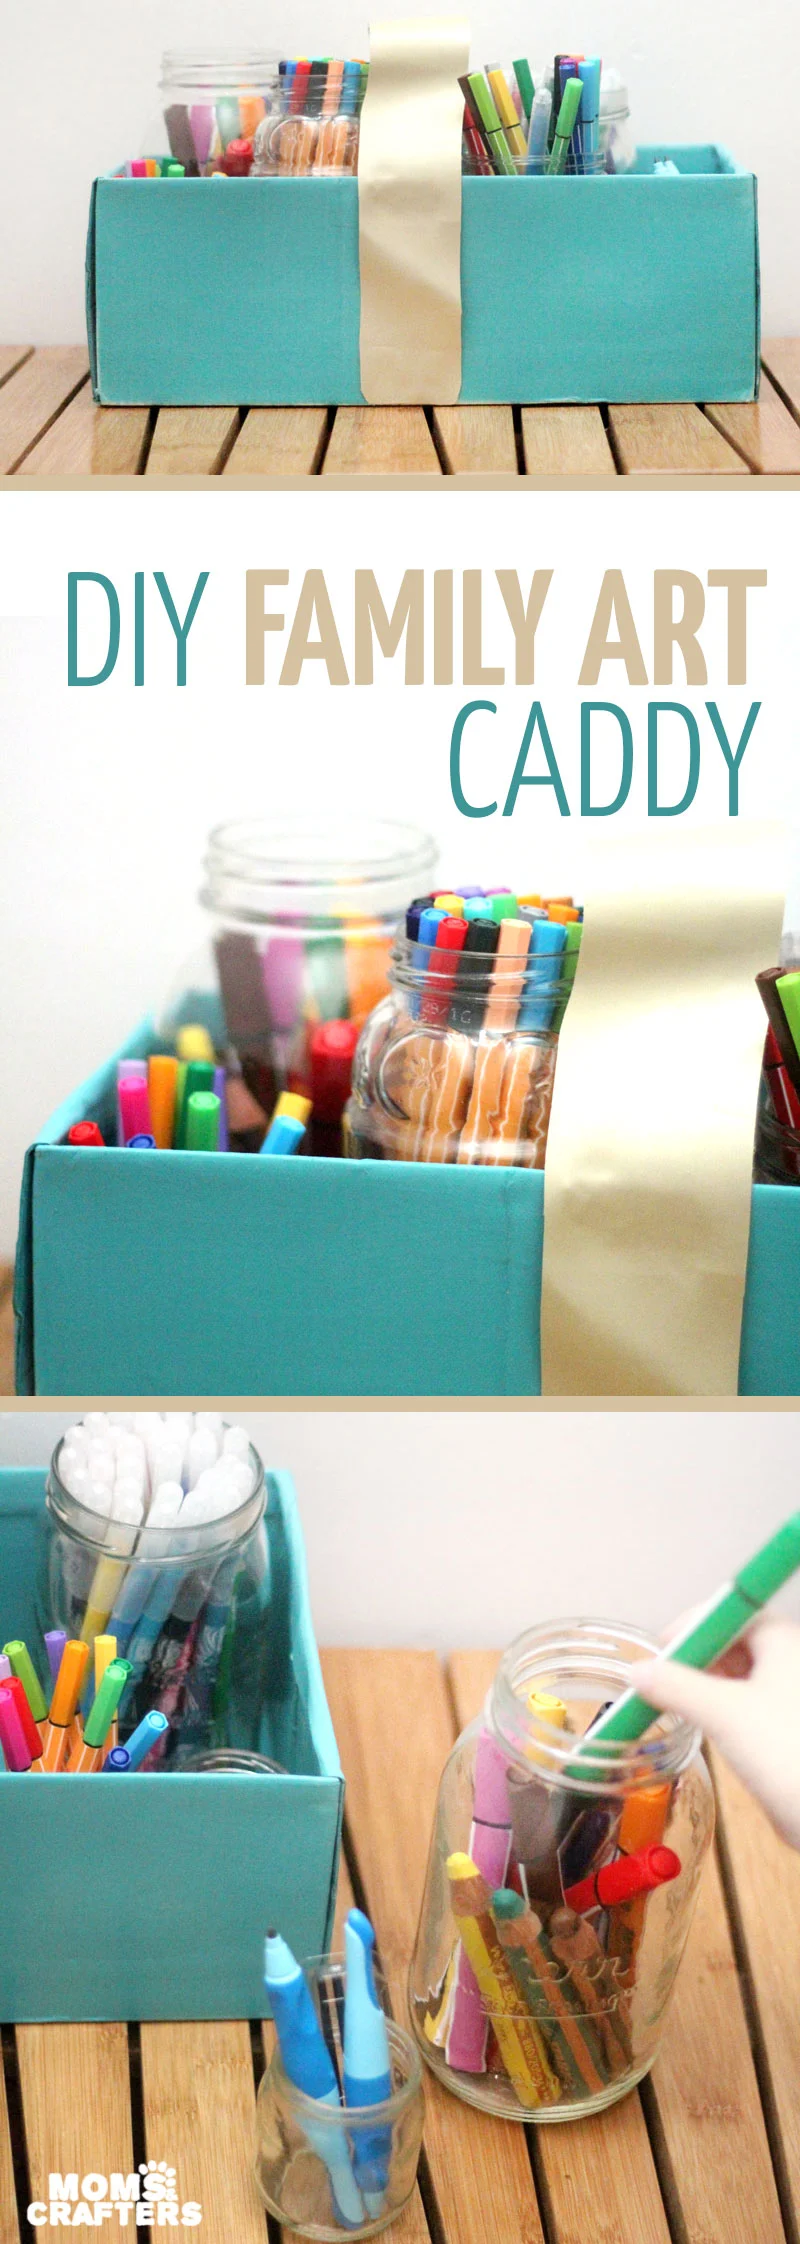 Make a super easy upcycled DIY marker storage caddy to transport the entire family's art supplies from the closet to the table in a usable bin! The jars can be removed individually to easily set up and clean up a family art station with coloring supplies for kids and adults. This recylced cardboard box and jar craft is so easy to make, and is an awesome craft room organization hack. 